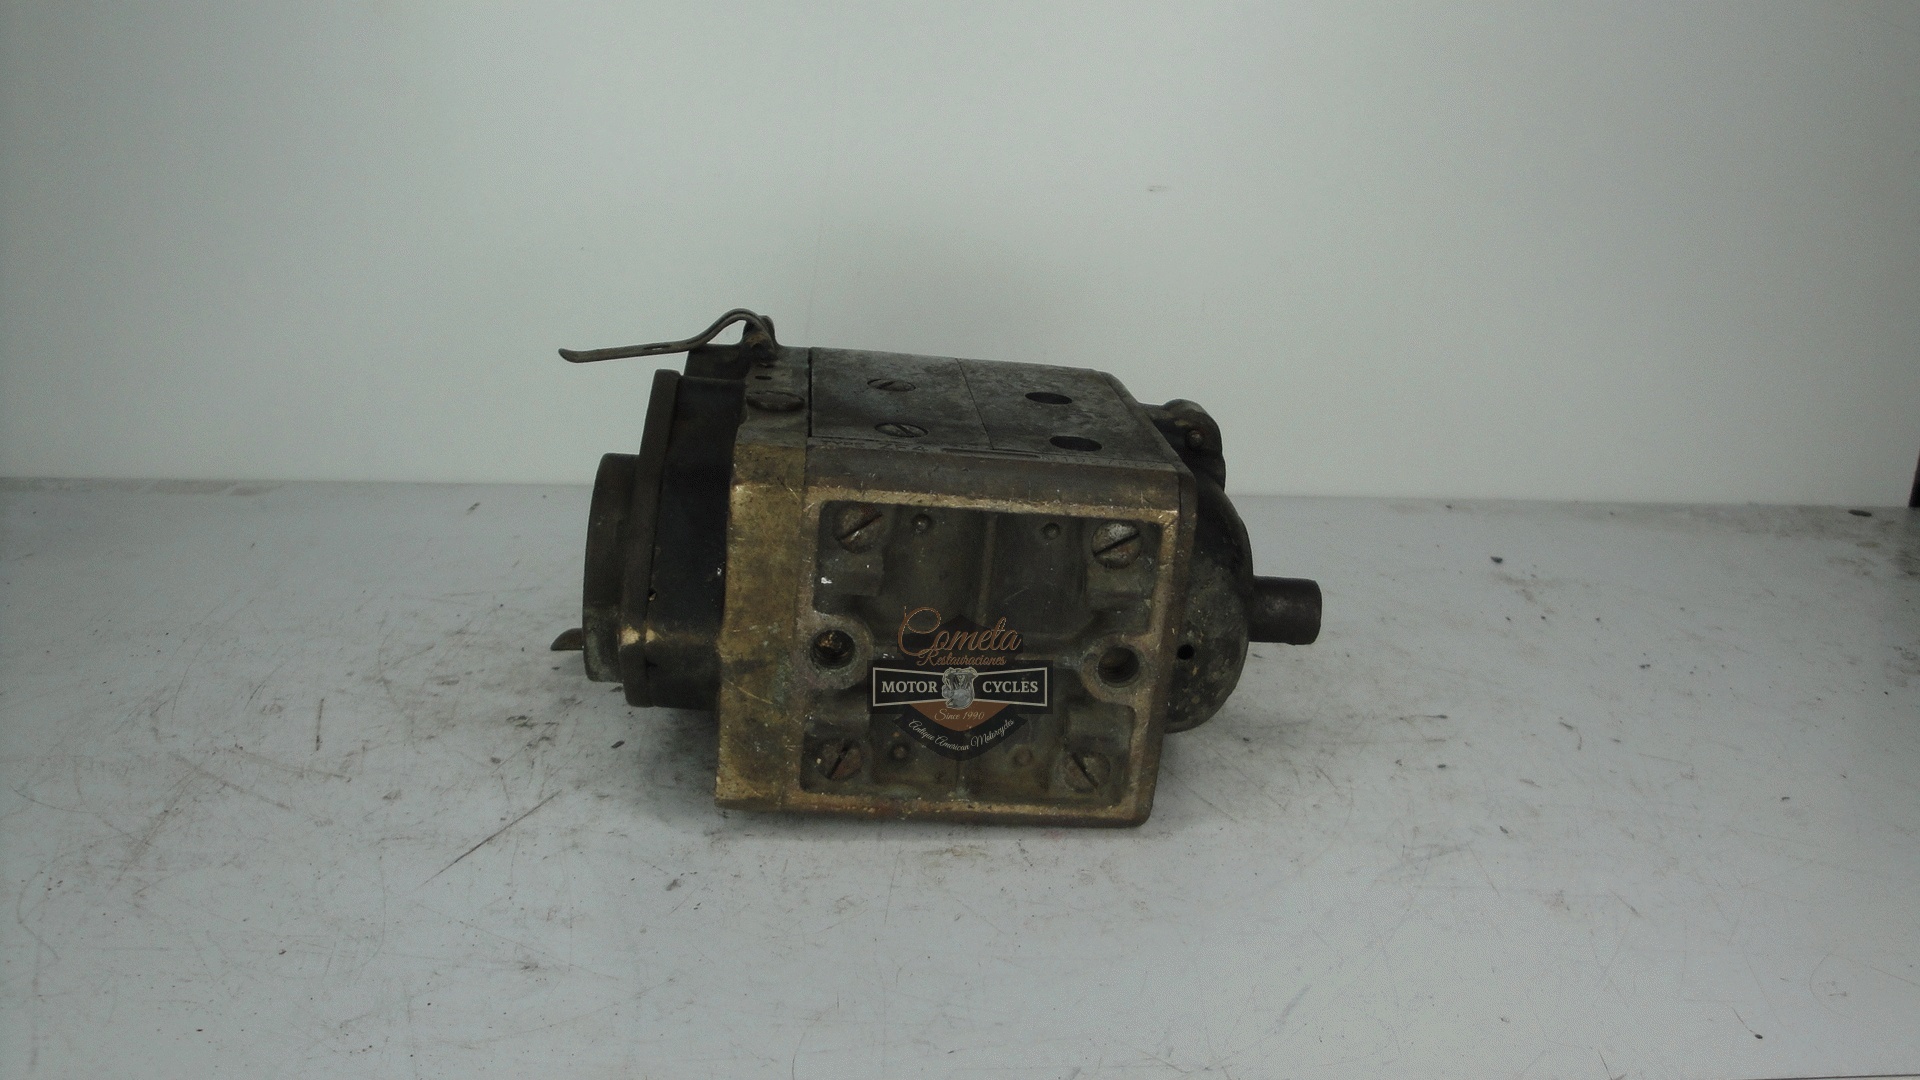 MAGNETO BOSCH TYPE ZF4 COCHE / CAMION / TRACTOR / AÑOS 1920 / 1930 / 1940 